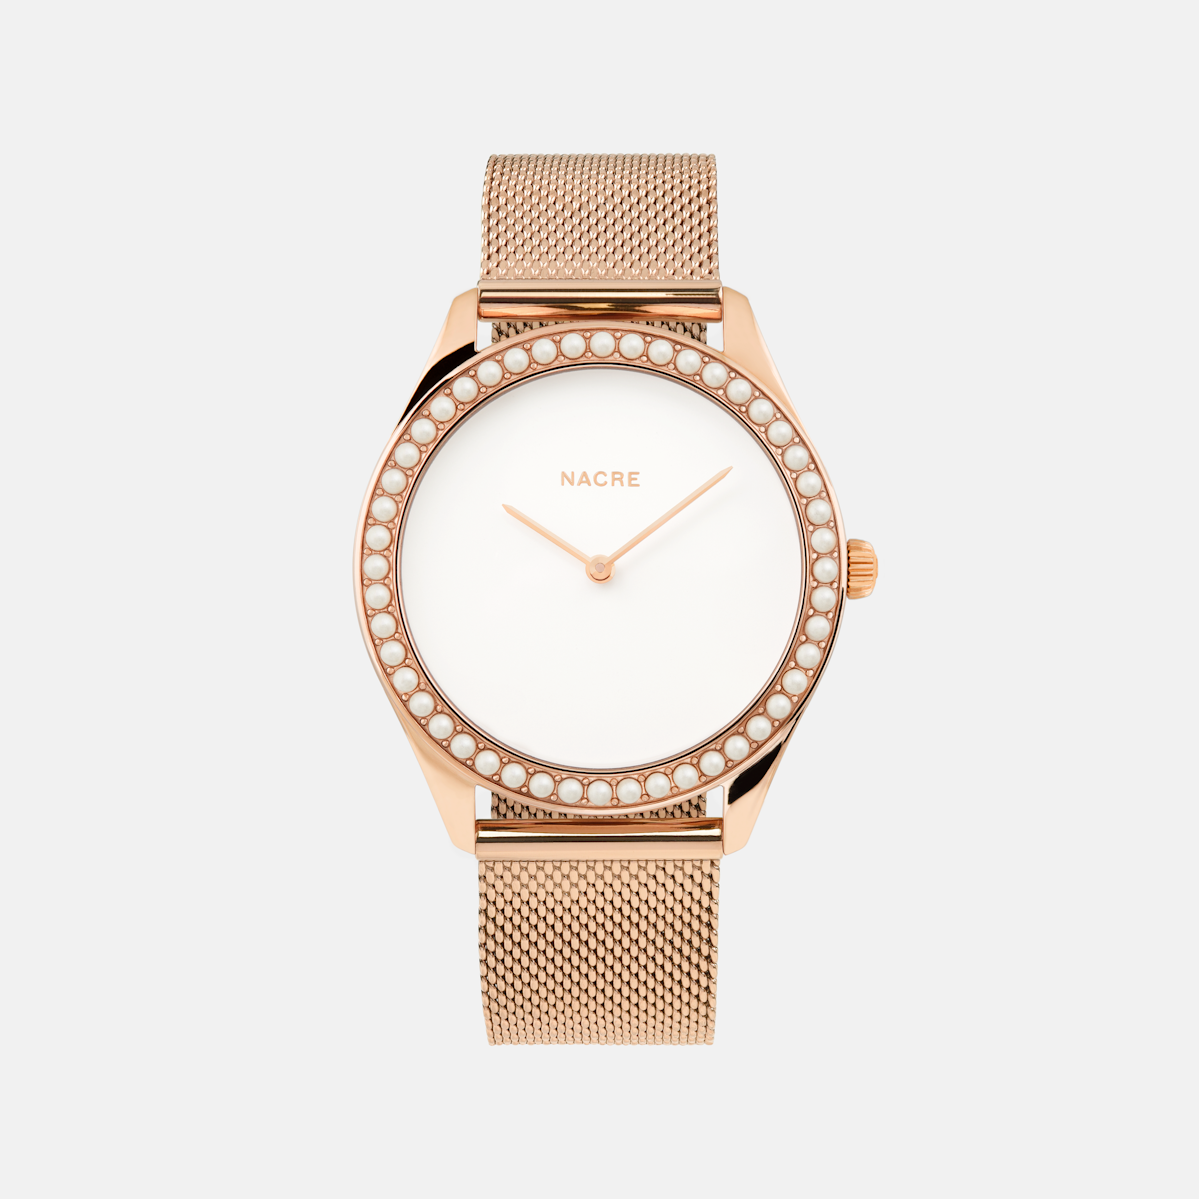 Lune 48 - Rose Gold - Sand Leather